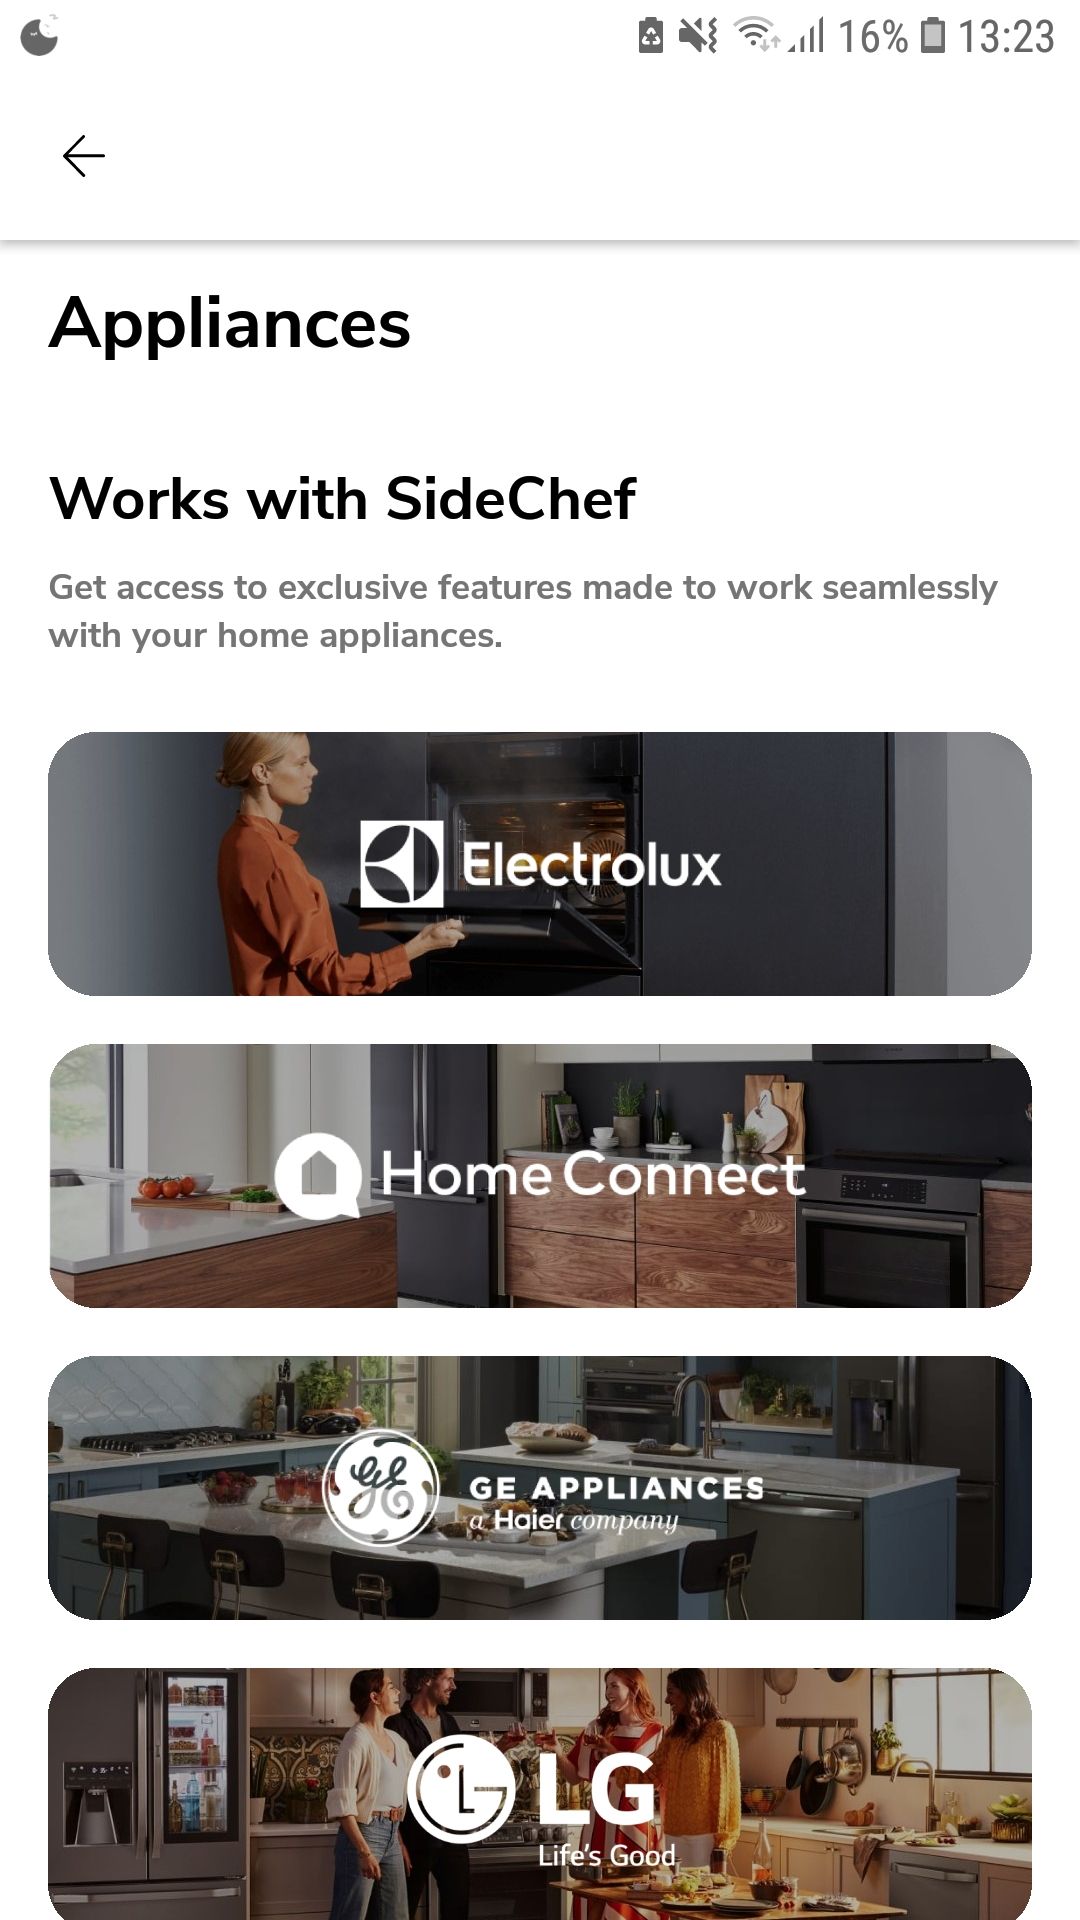 SideChef mobile recipe and meal planning app appliances